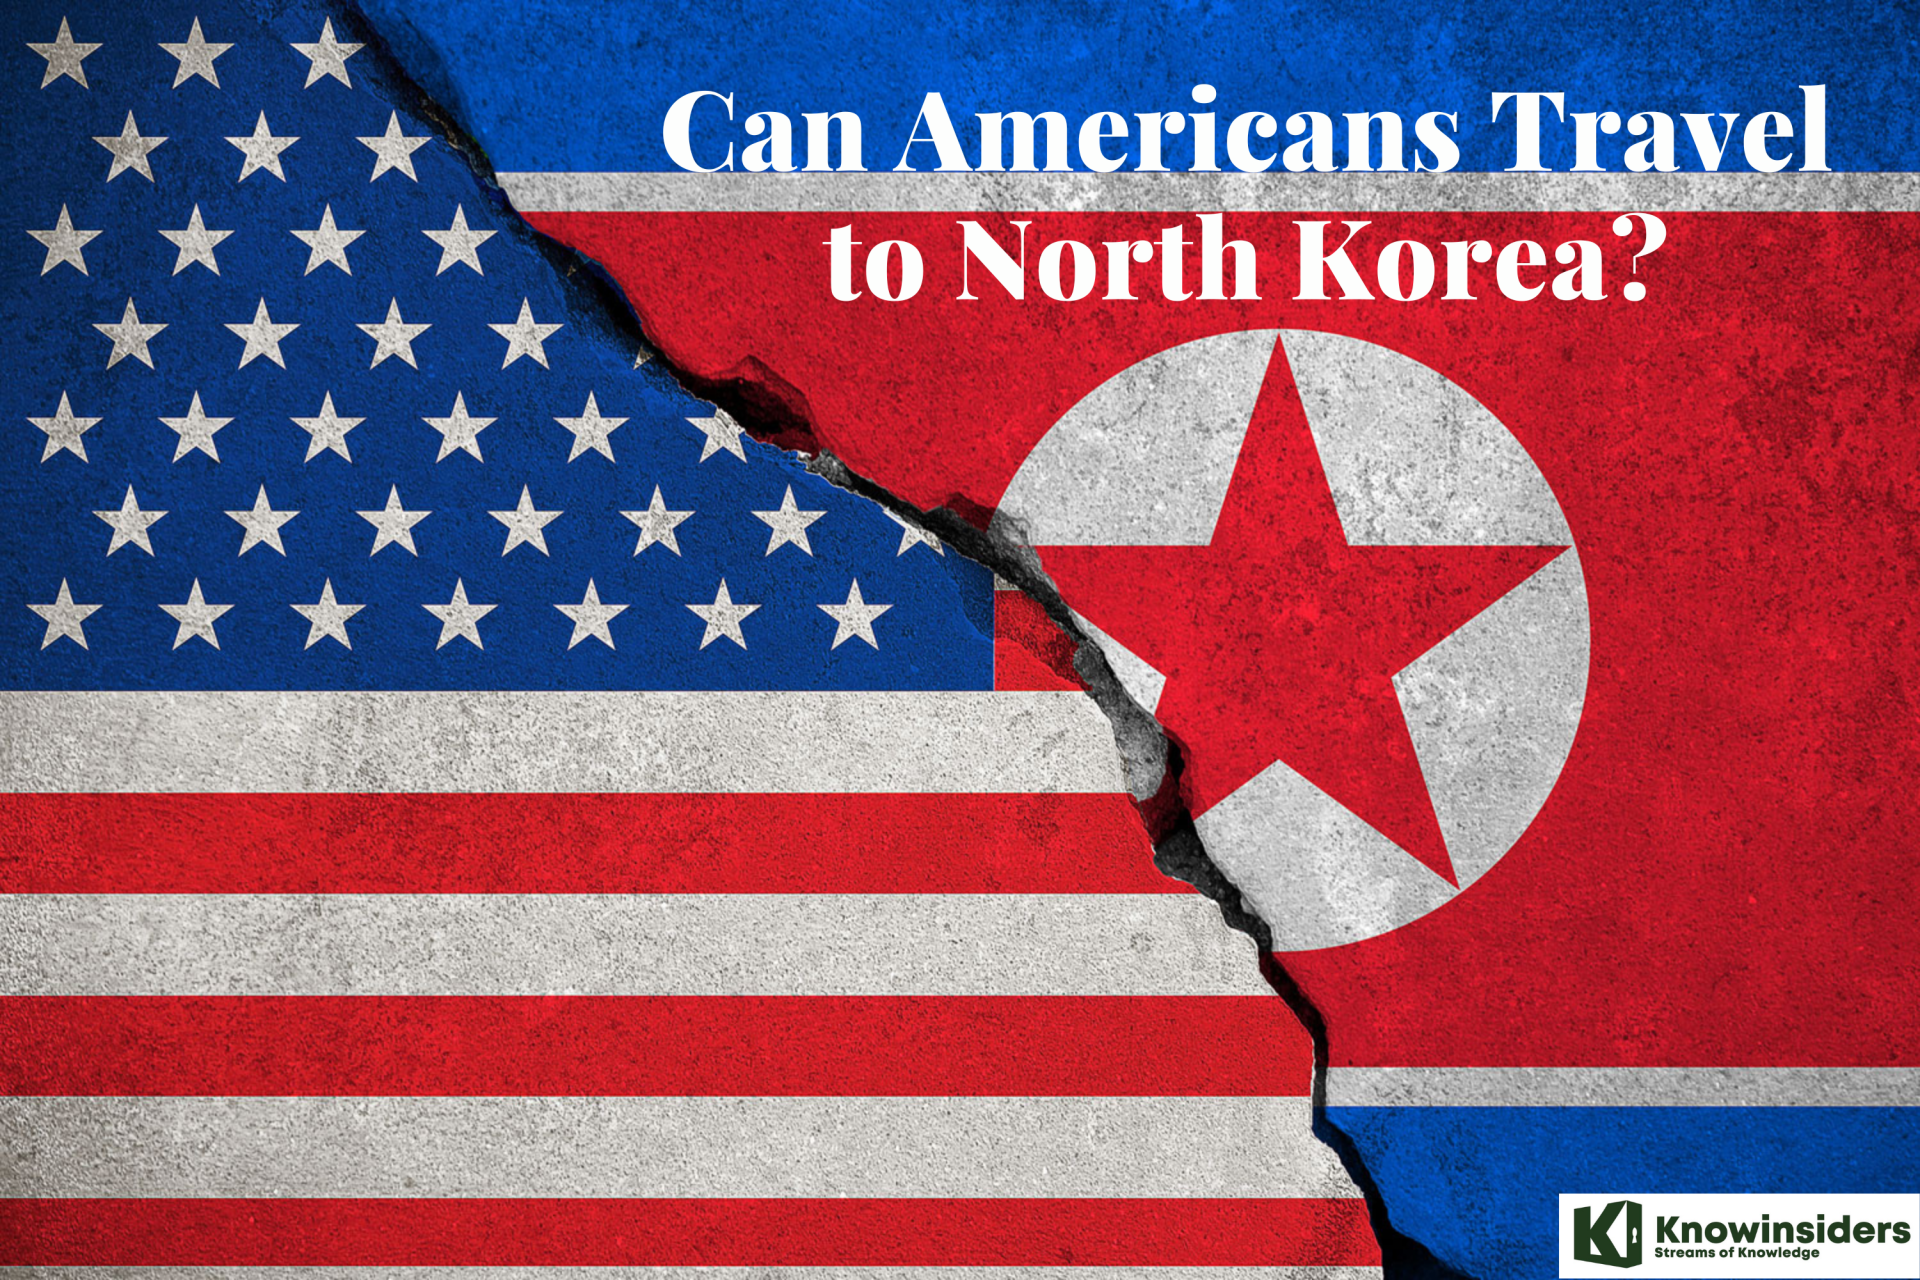 Can Americans Travel to North Korea?